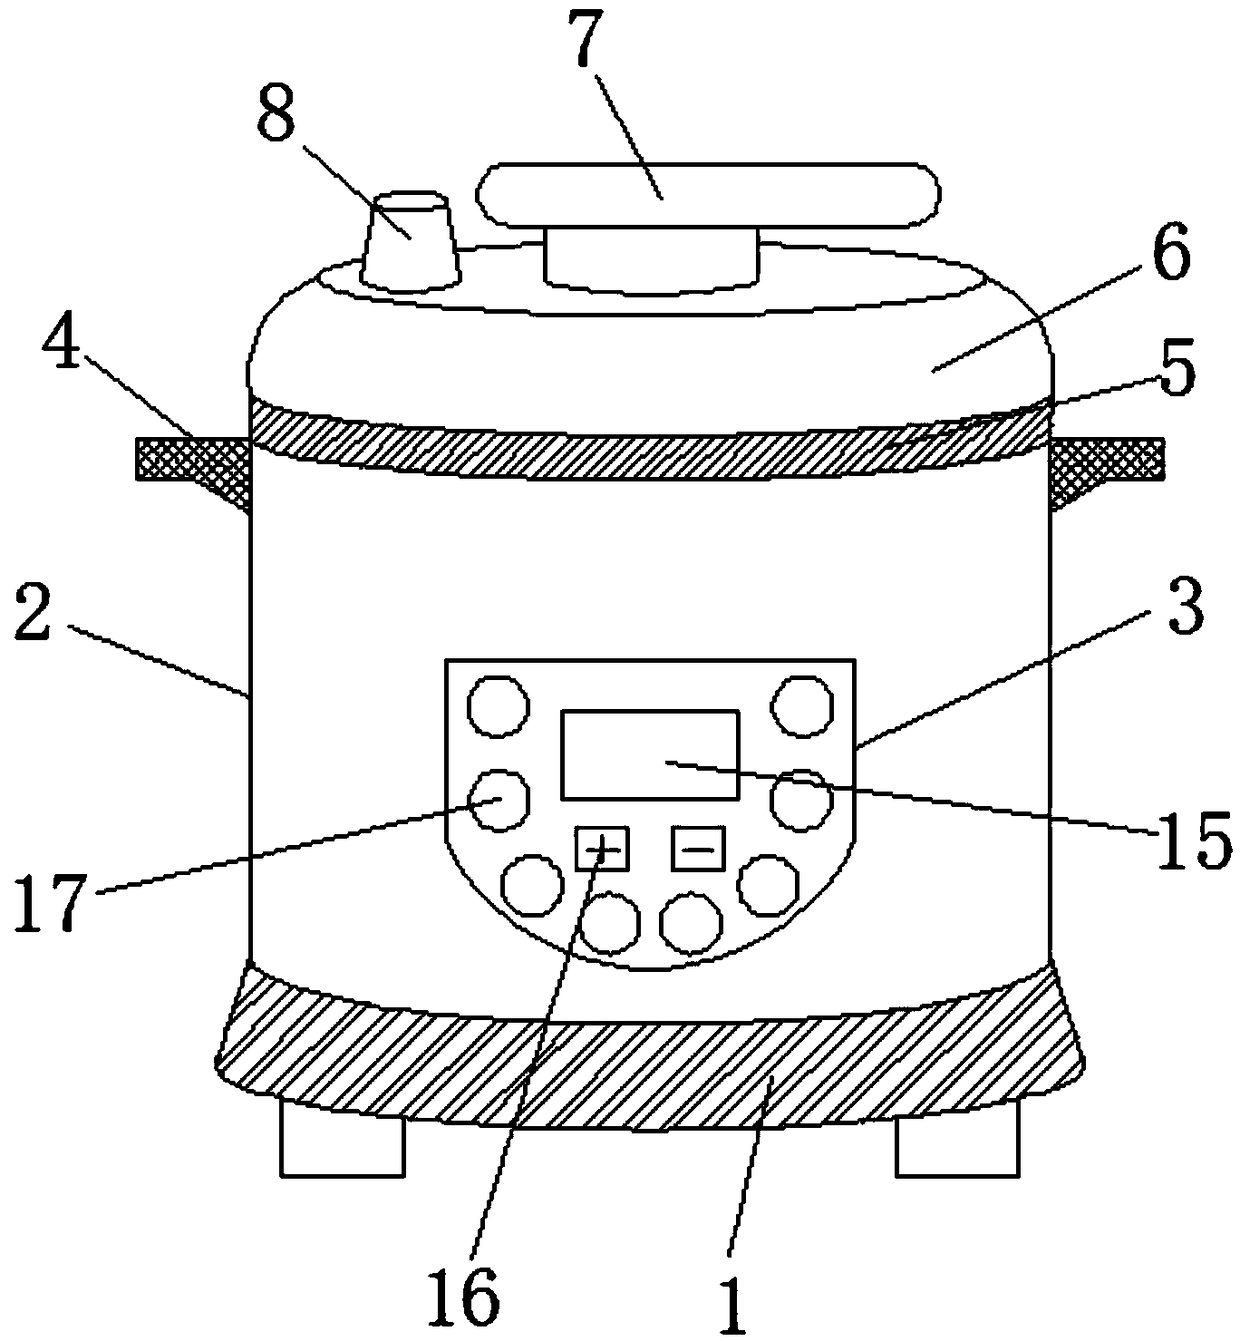 Multi-functional electric rice cooker with hand-operated timer